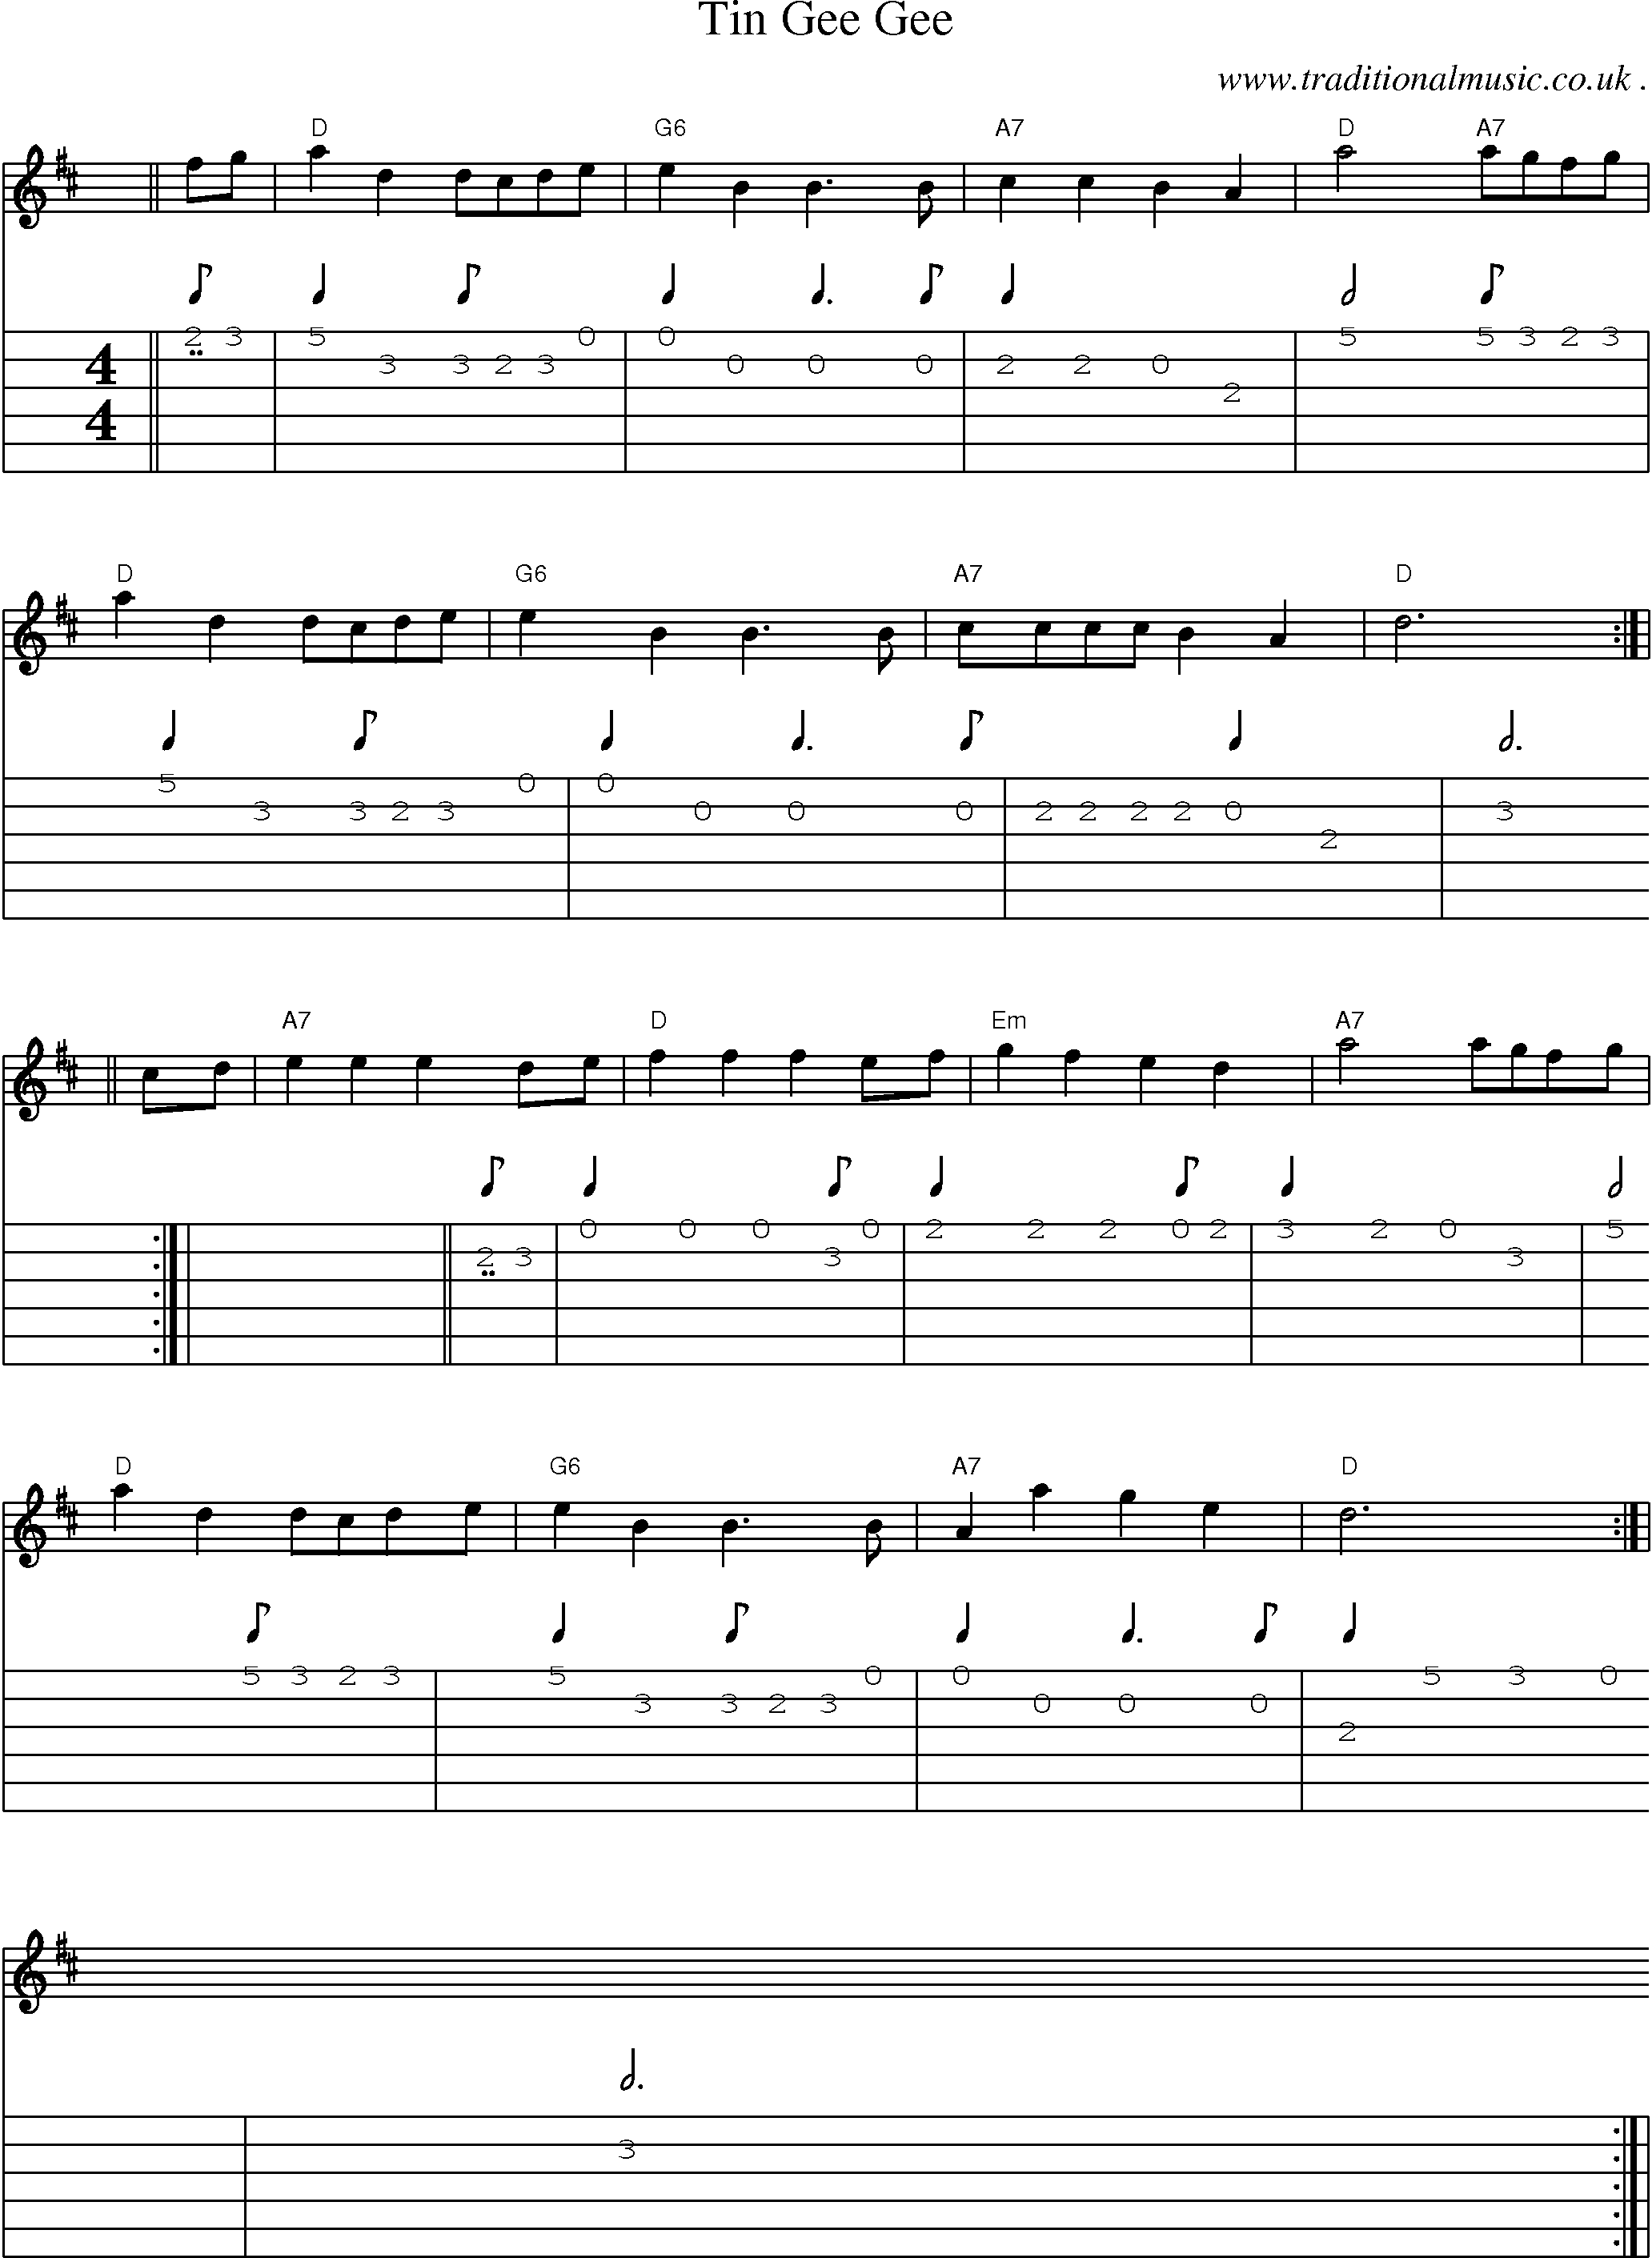 Sheet-music  score, Chords and Guitar Tabs for Tin Gee Gee